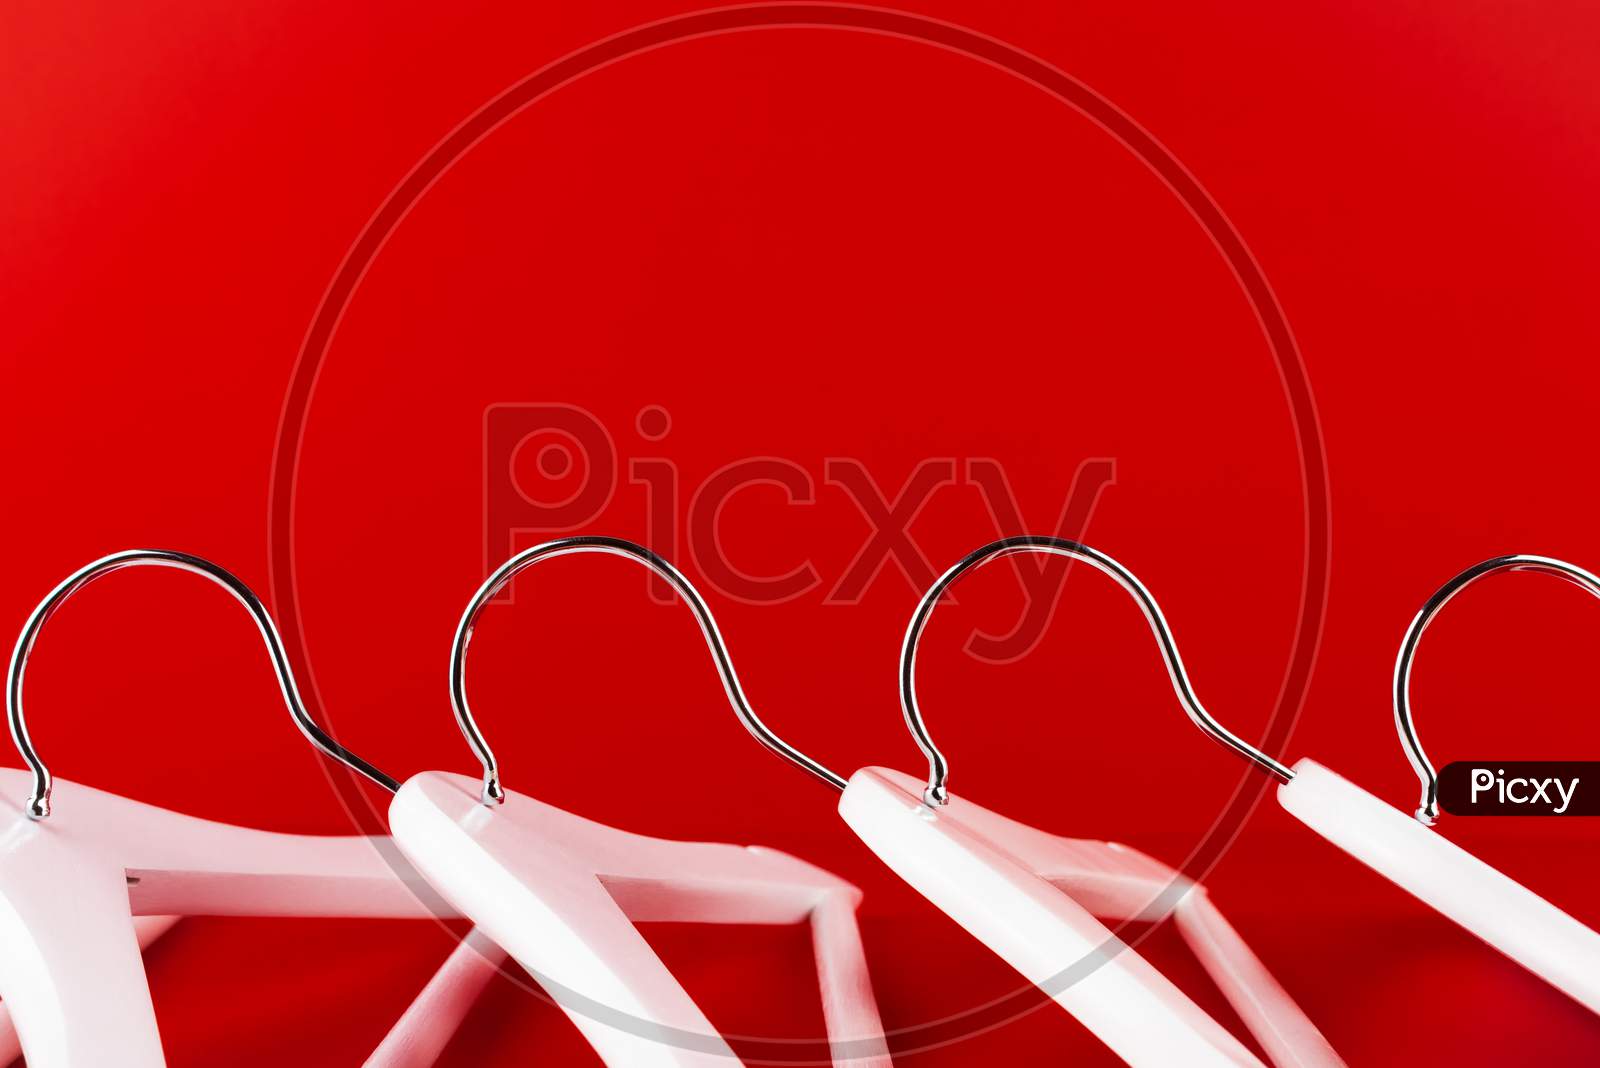 White Hangers On A Red Background. Sales Clothes Concept.